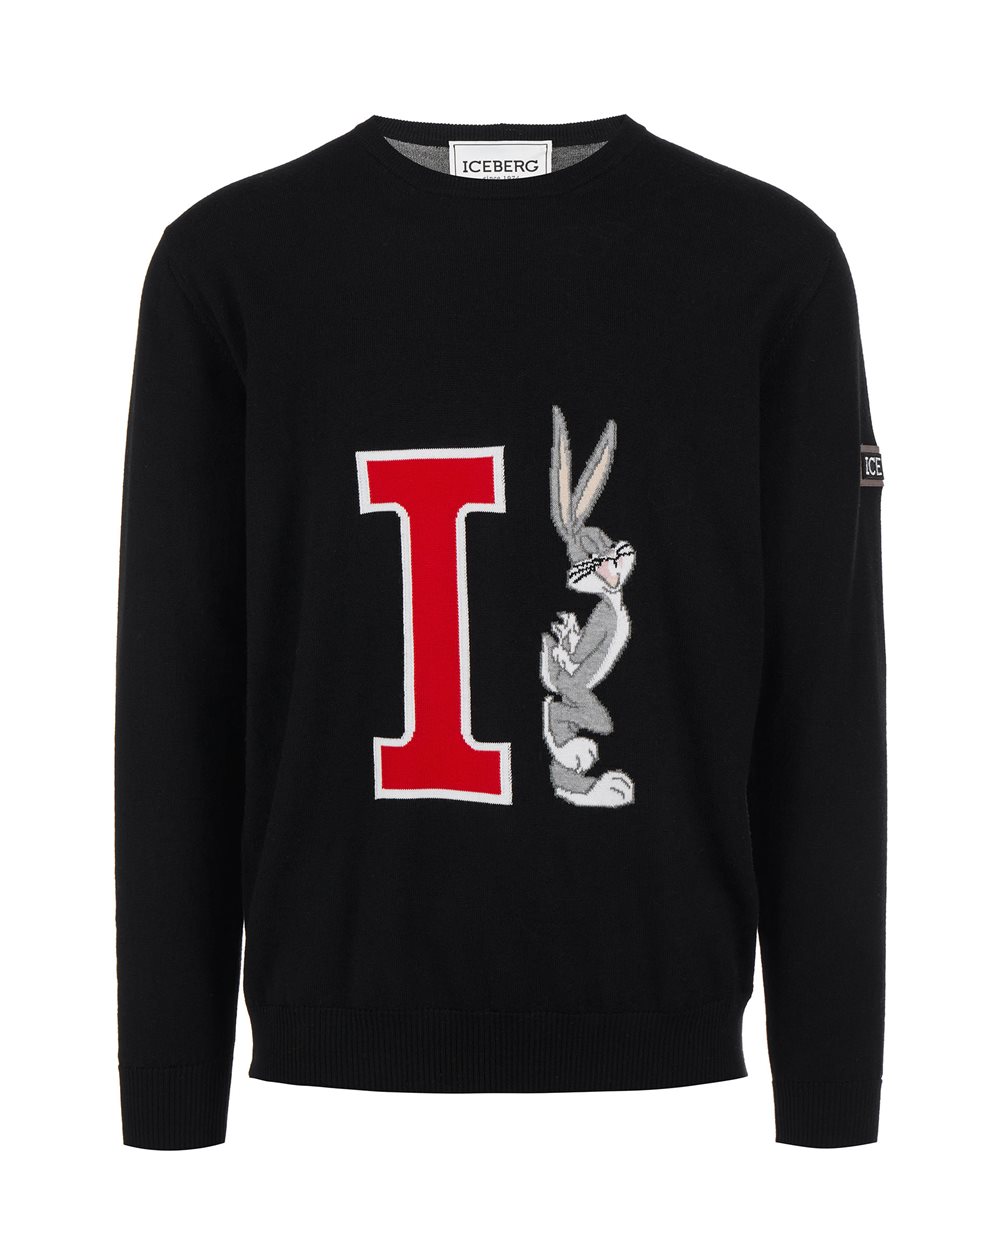 Black sweater with cartoon detail - Knitwear | Iceberg - Official Website